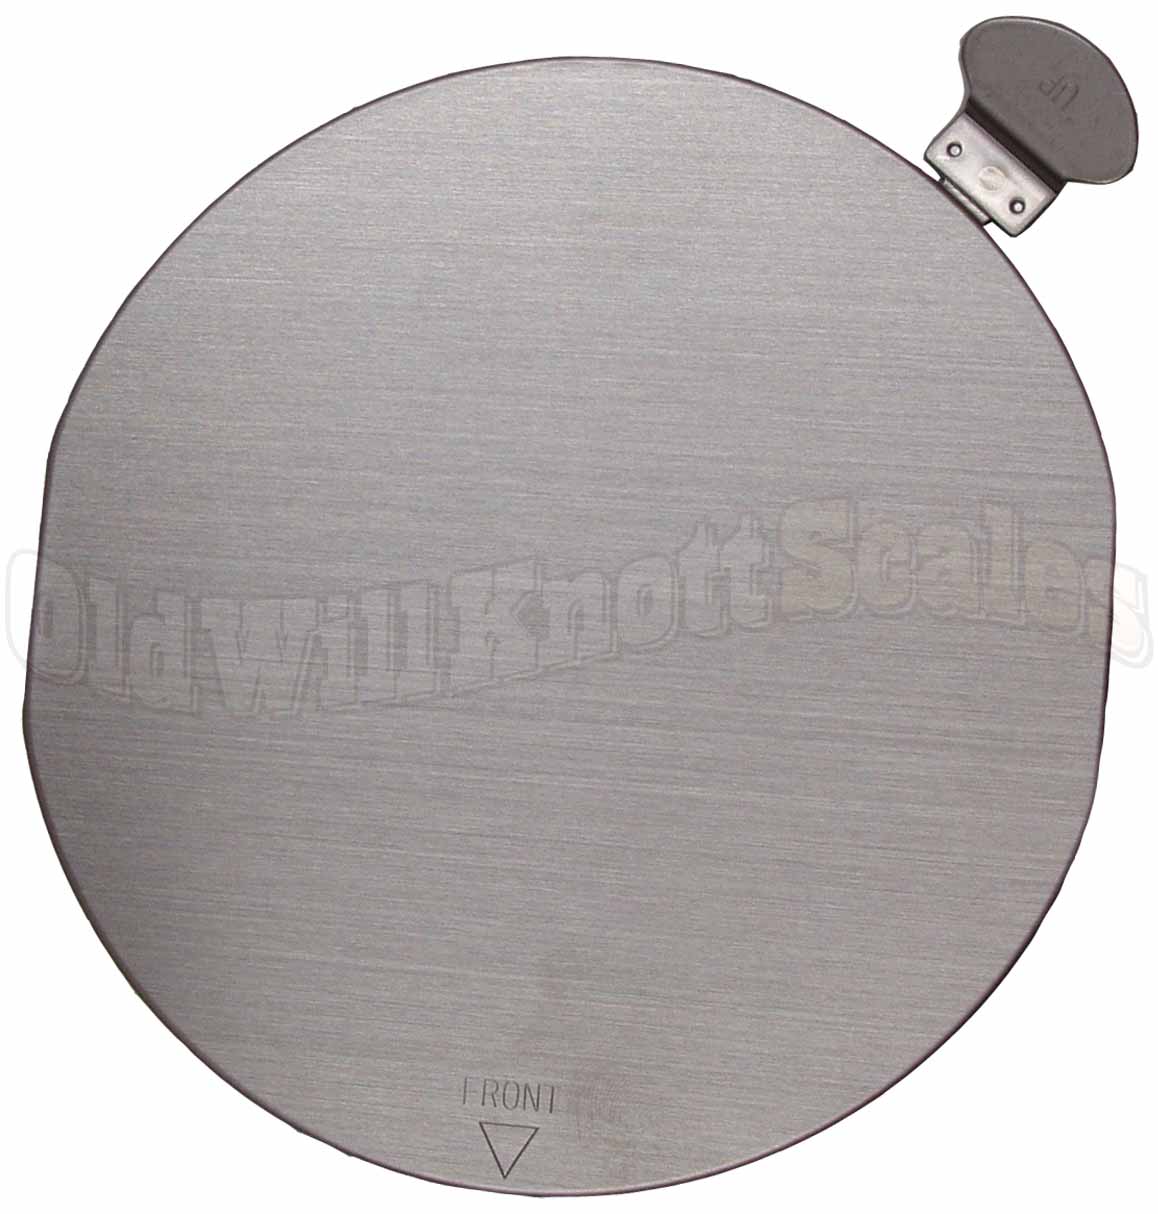 A&D AX:043008052 Stainless Pan